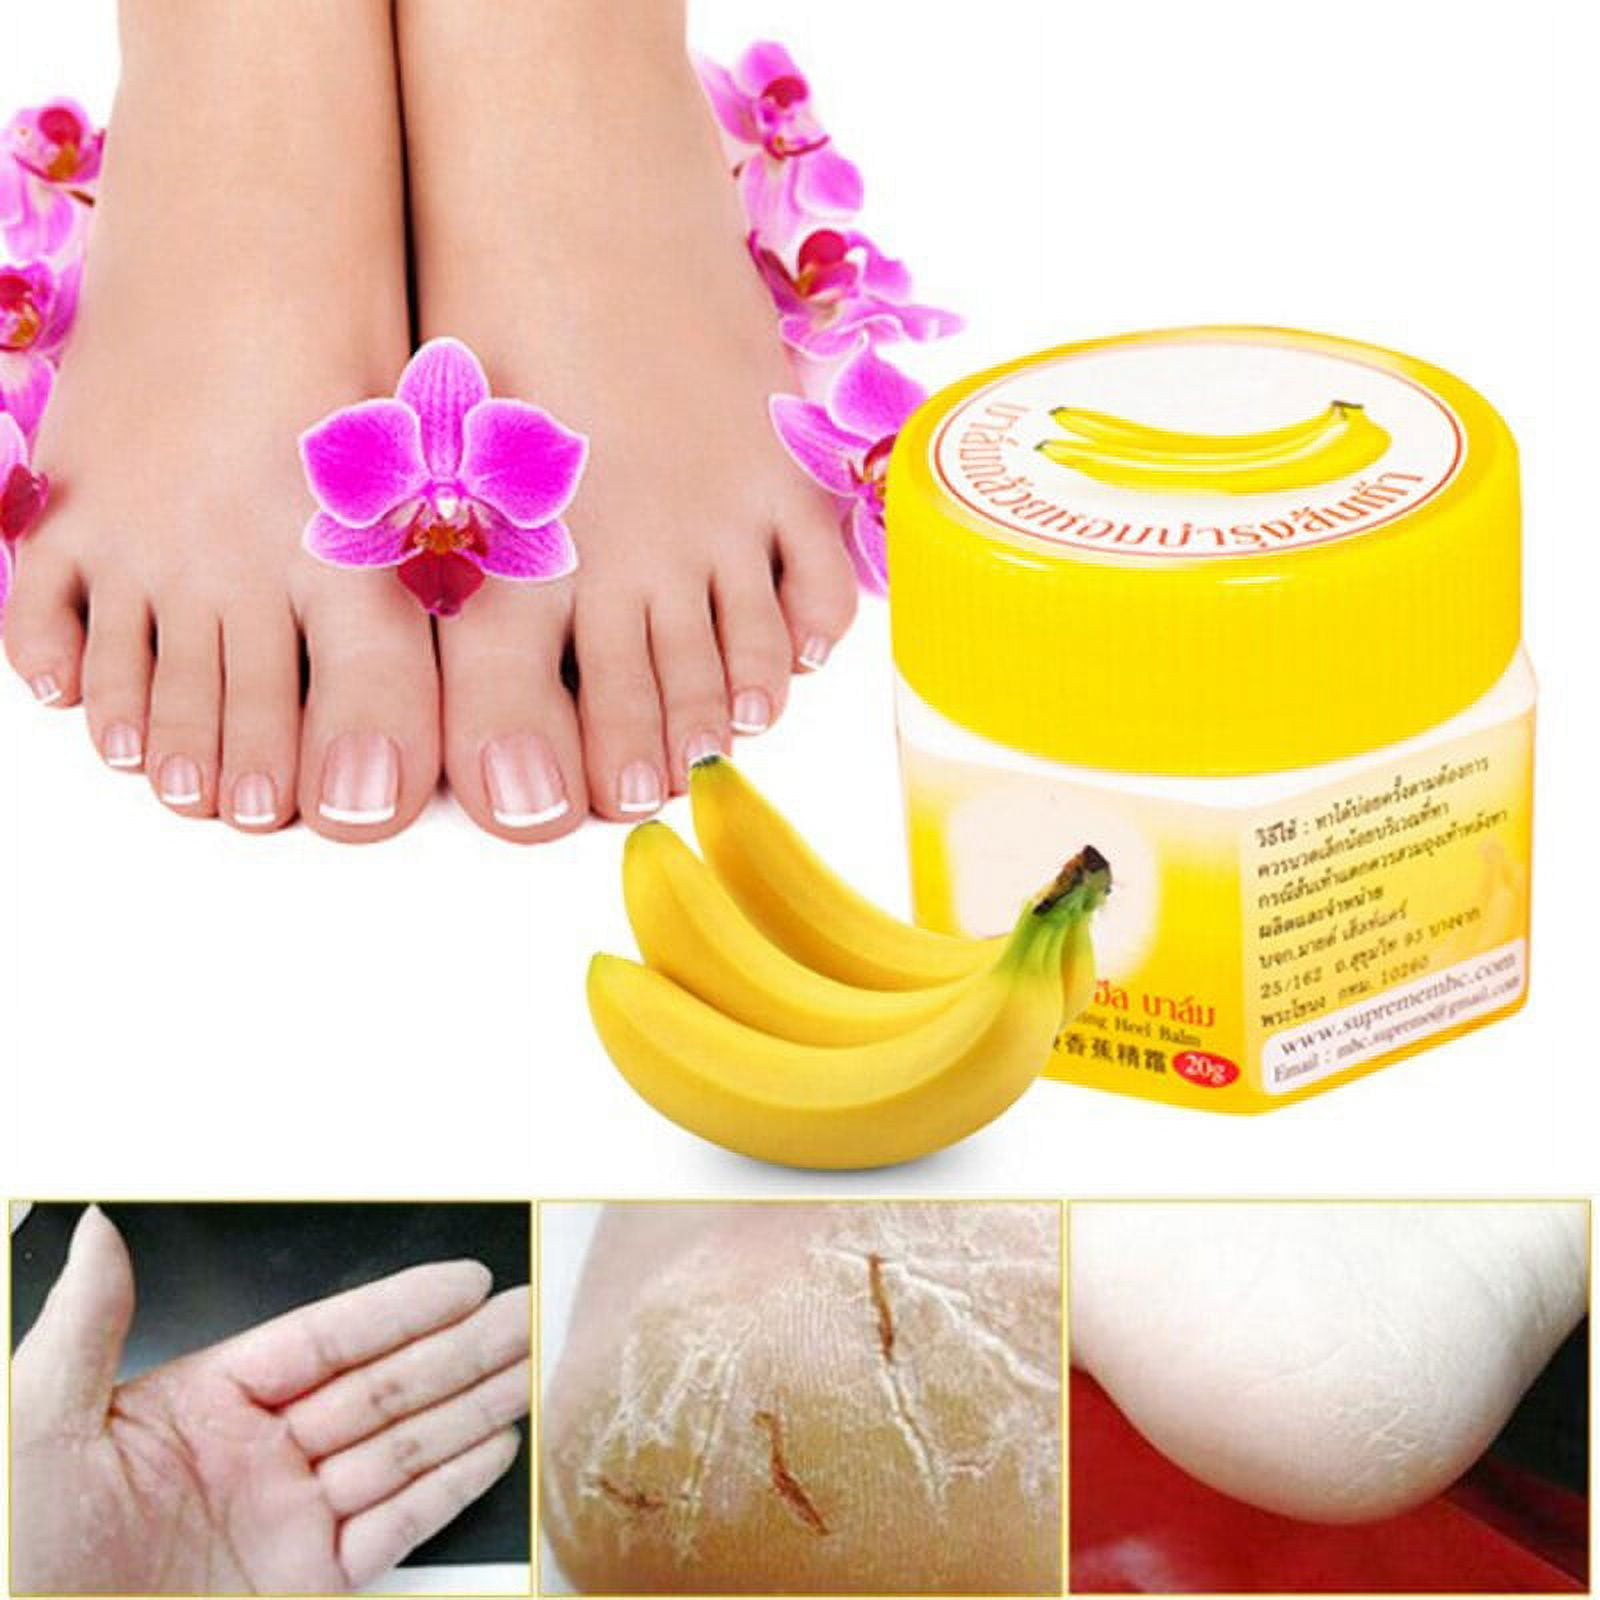 VAIDUE Anti Crack Full Length Silicone Foot Protector Moisturizing Socks  Foot-Care and Heel Cracks, Foot-Care For Dry, Cracked Heels, Rough Skin,  Dead Skin, Calluses Remover All Skin Care (1 pair) : Amazon.in: